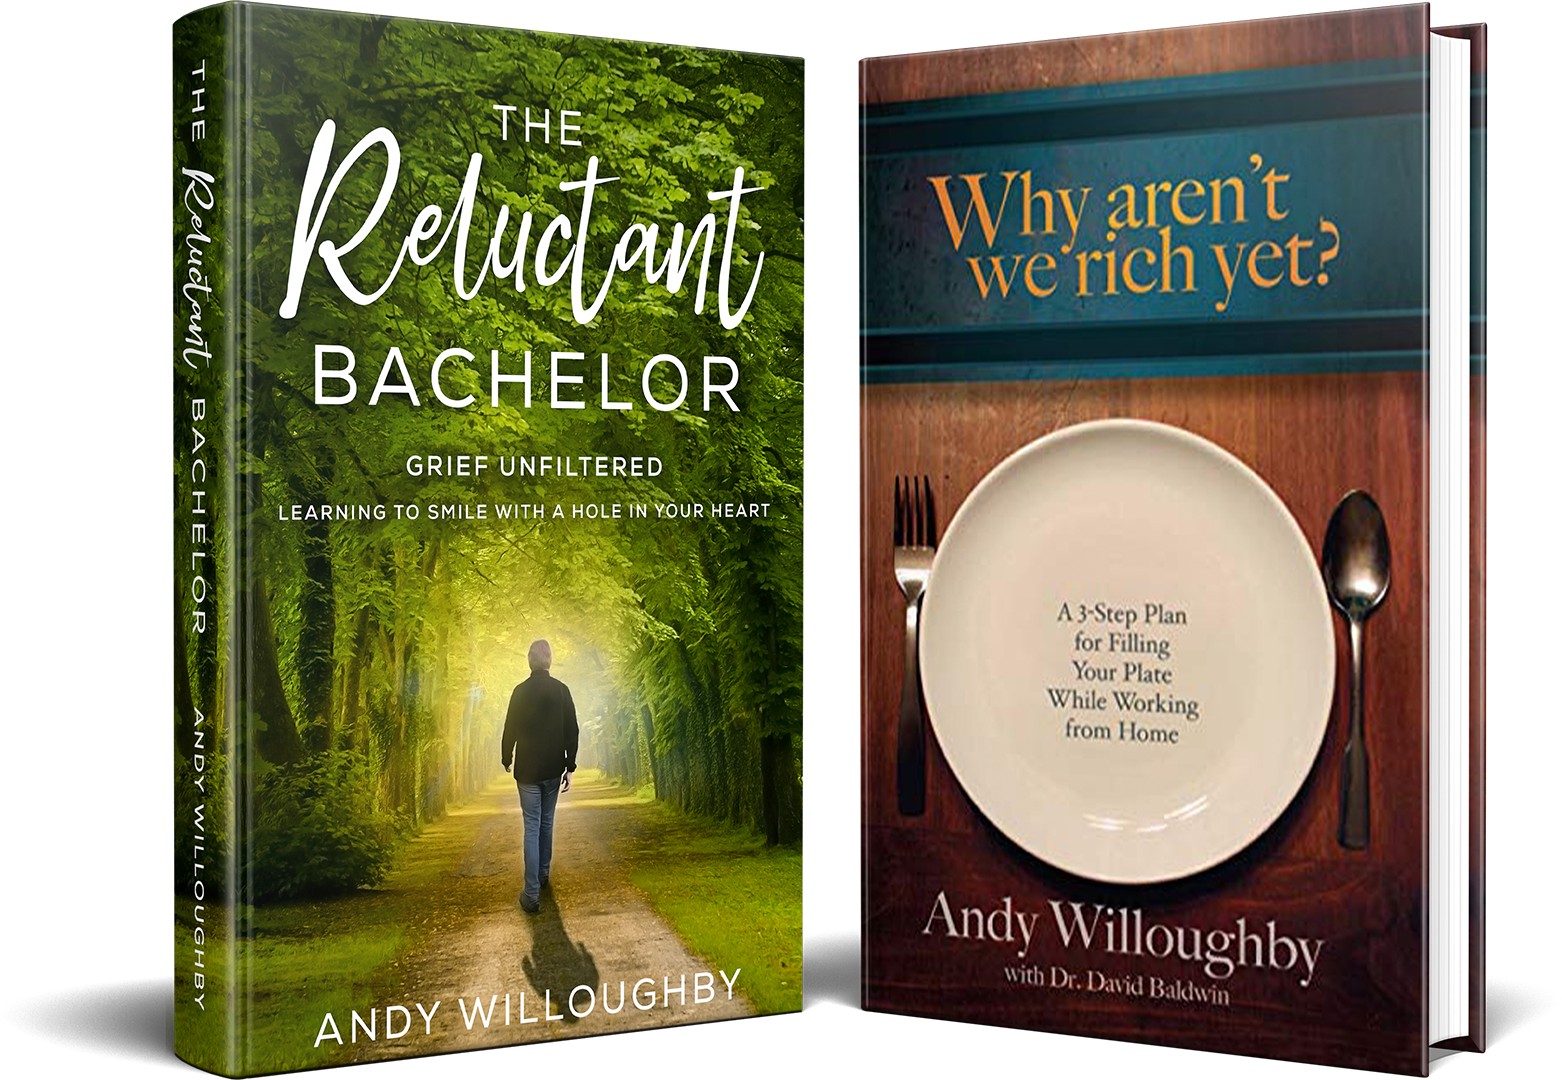 Image of Andy's books